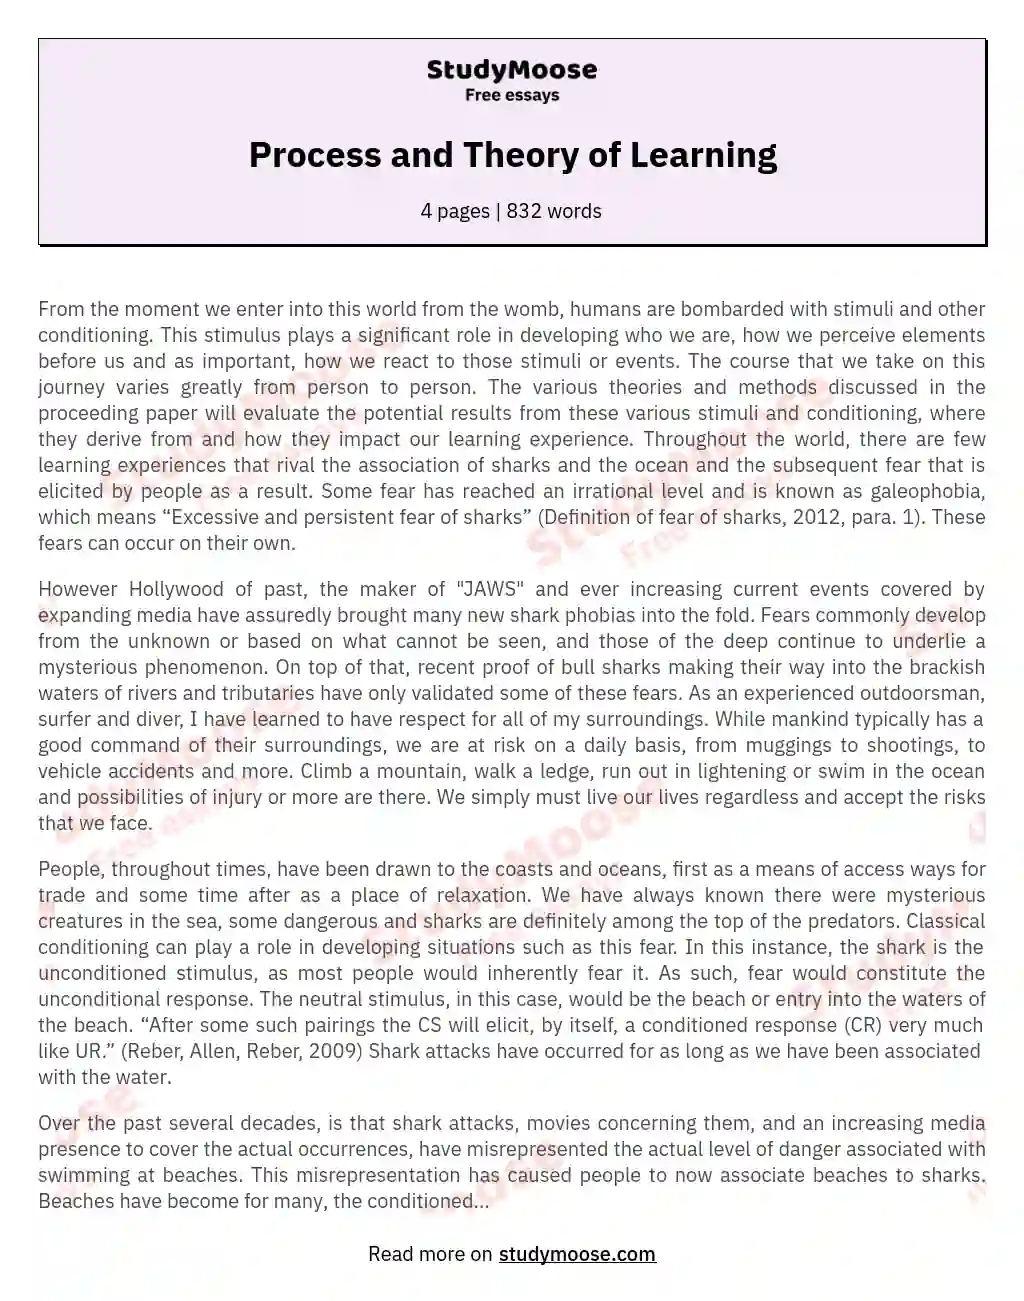 Process and Theory of Learning essay